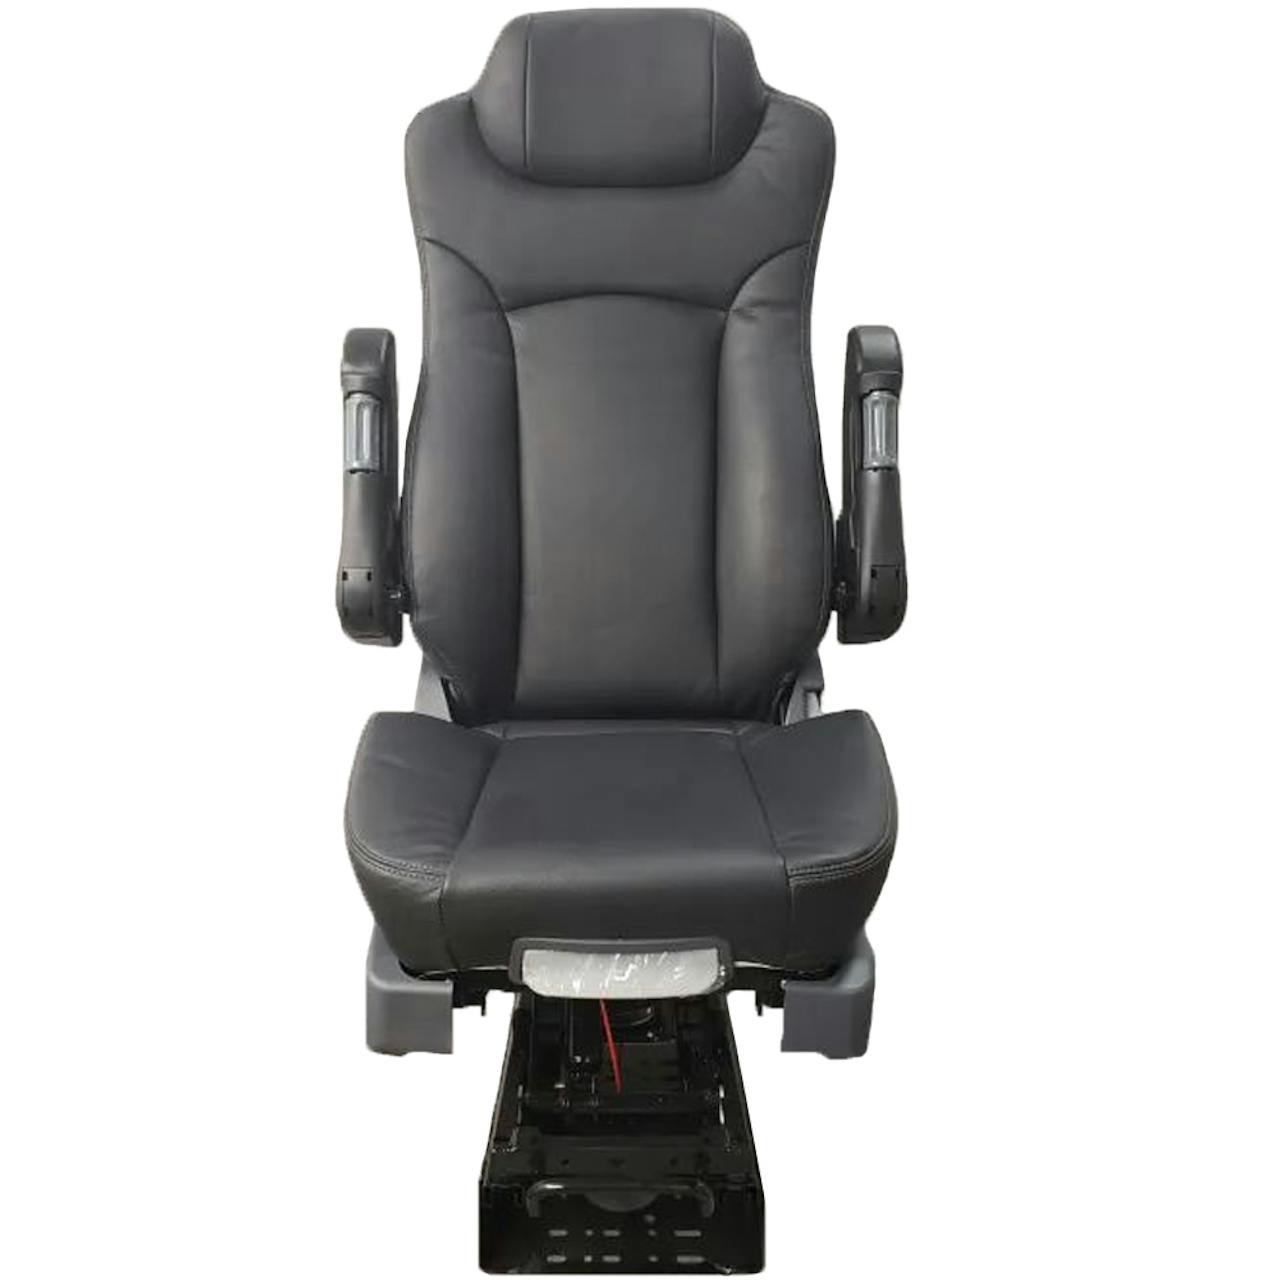 PRIME SEATING TC400C CLOTH W/ LEATHER ACCENT AIR RIDE TRUCK SEAT